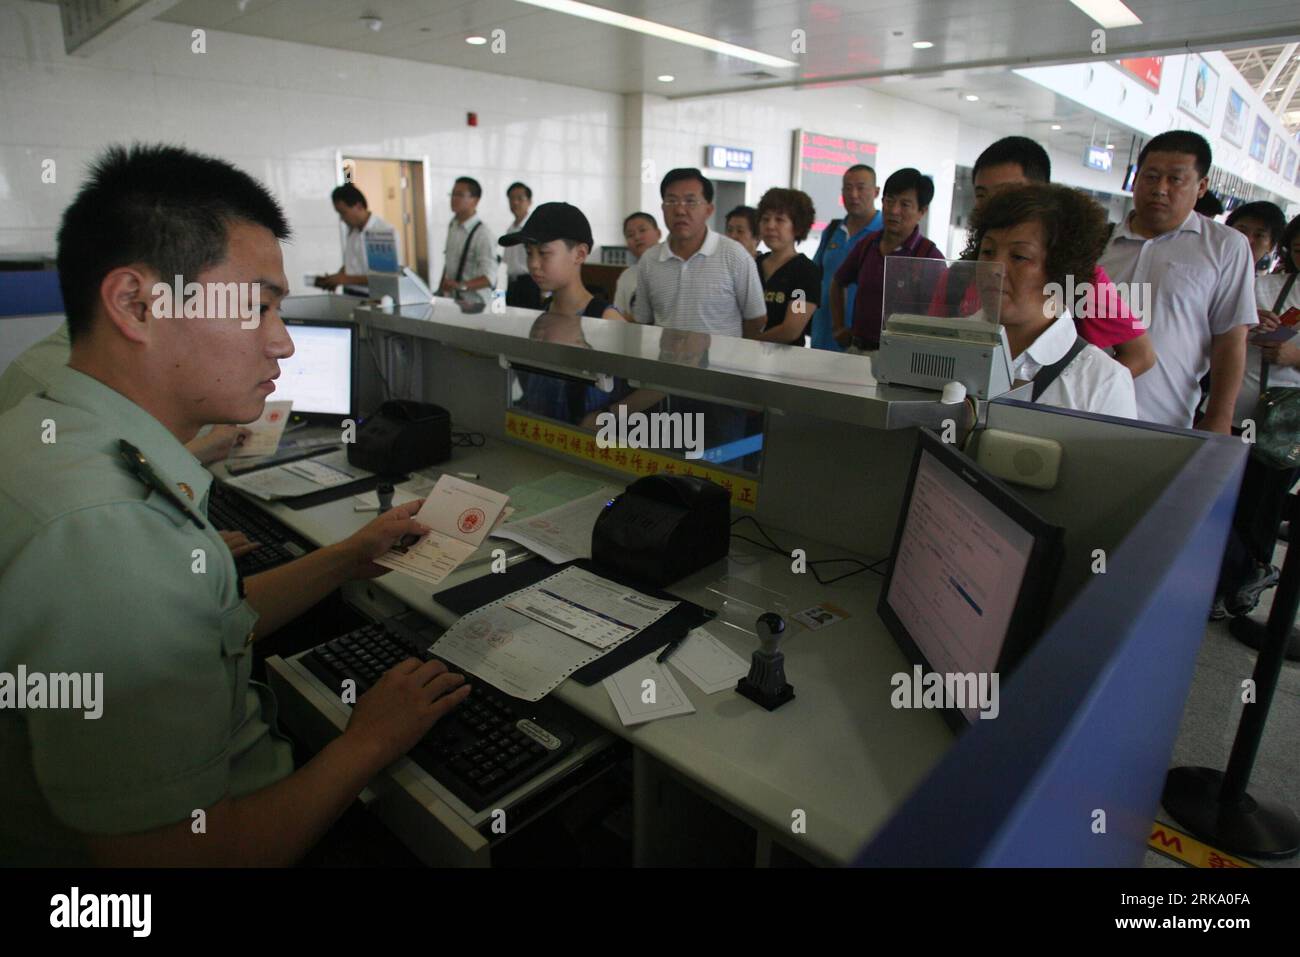 Bildnummer: 54248977  Datum: 23.07.2010  Copyright: imago/Xinhua (100723) -- JINAN, July 23, 2010 (Xinhua) -- Passengers check out at the airport in Jinan, capital of east China s Shandong Province, July 23, 2010. Shandong Airlines launched direct flights from Jinan to Taichung Friday, which is the sixth route between east China s Shandong Province and southeast China s Taiwan. The first flight reached Ching Chuan Kang Airport in Taichung at 10 o clock am. (Xinhua/Lu Chuanquan)(xzj) (2)CHINA-SHANGDONG-JINAN-TAIWAN-TAICHUNG-DIRECT FLIGHT(CN) PUBLICATIONxNOTxINxCHN Gesellschaft Verkehr Luftfahrt Stock Photo